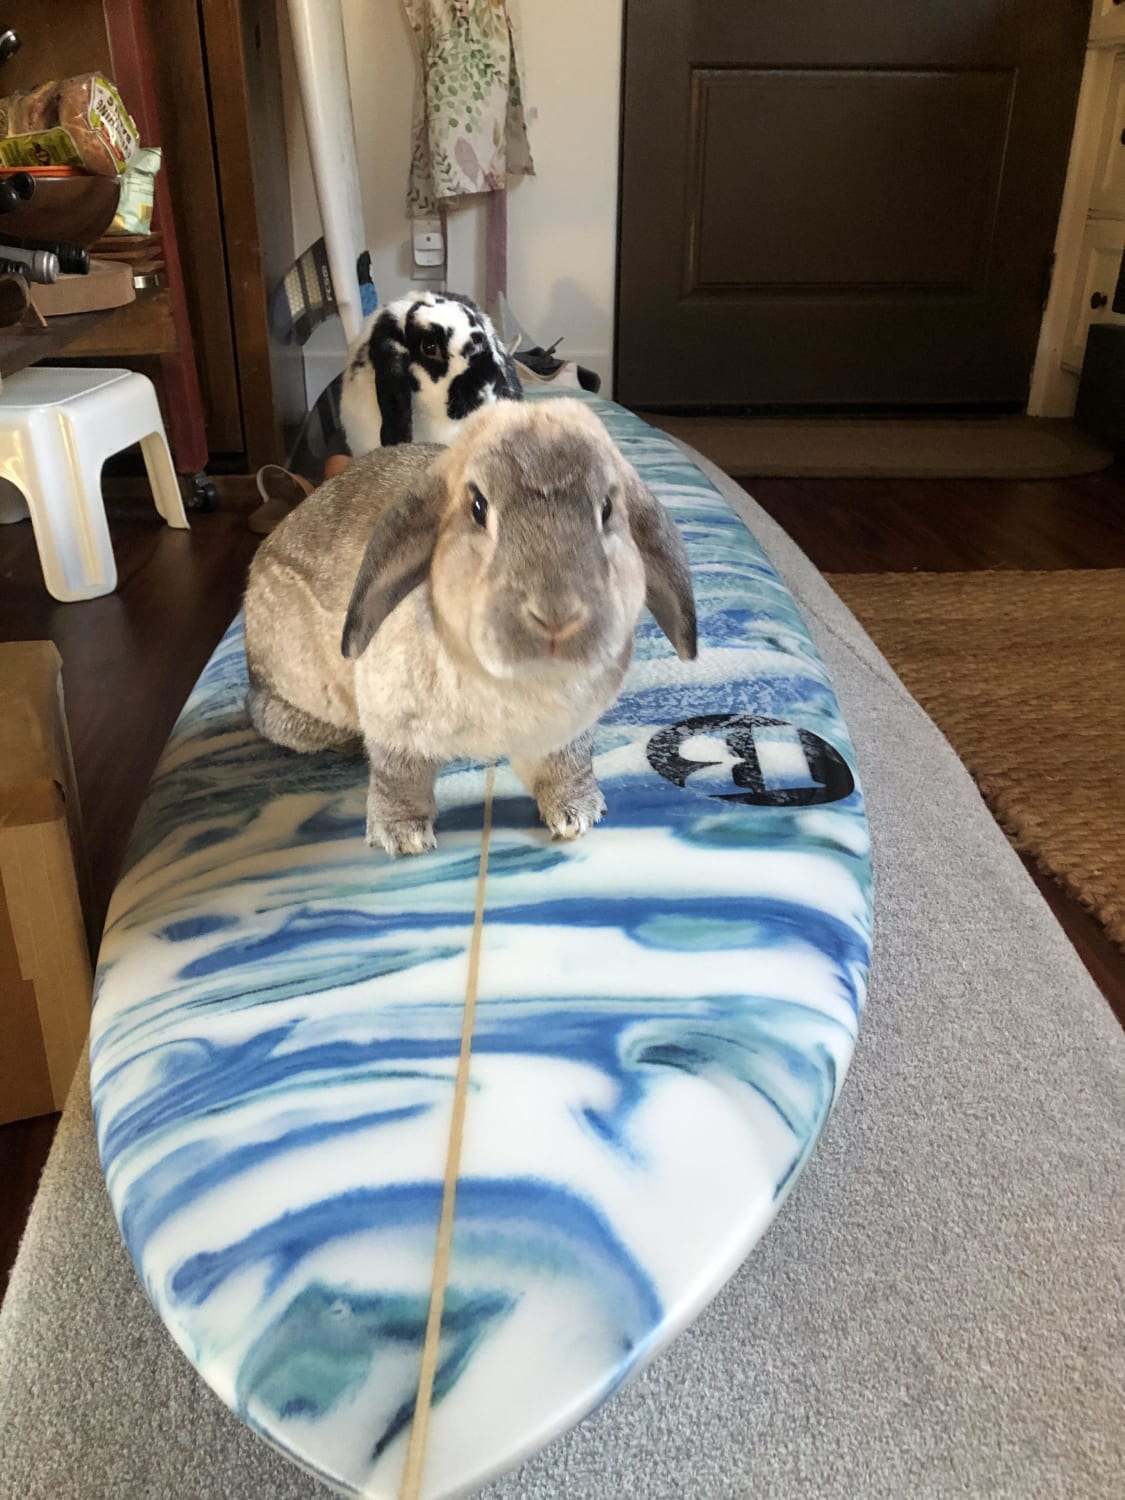 I’ve heard of surfing dogs before...